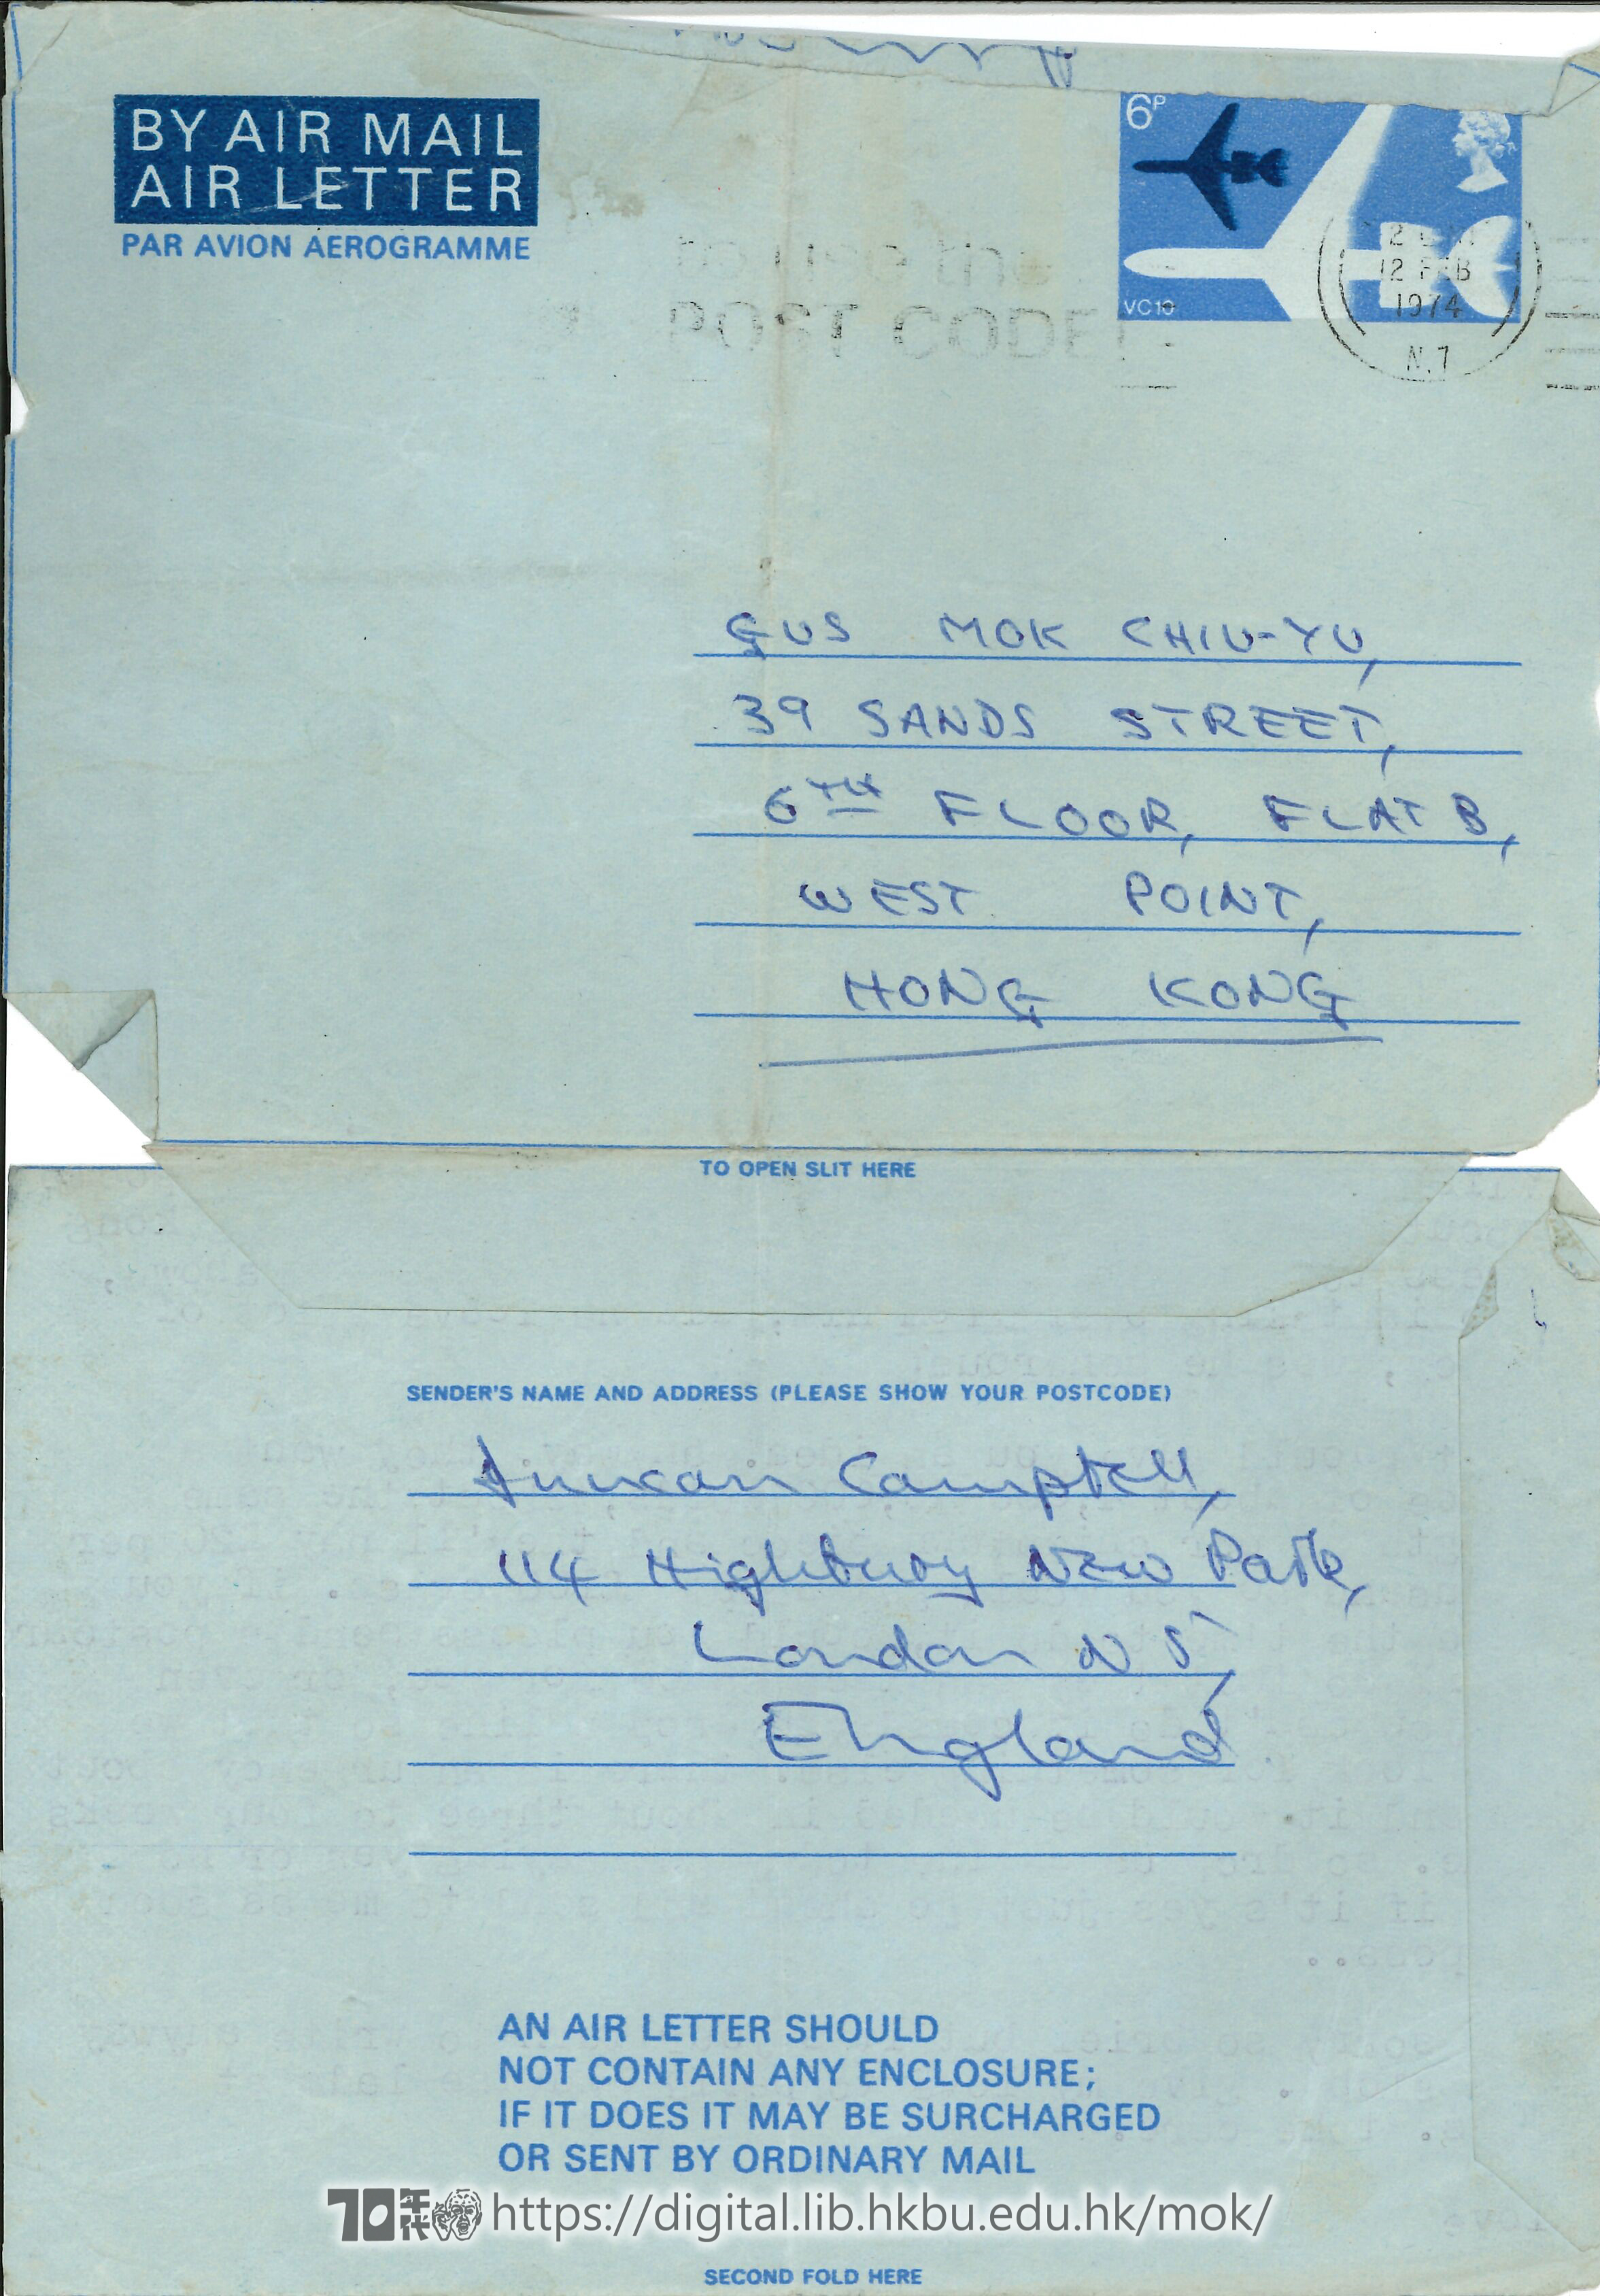   Letter from Duncan Campbell to Mok Chiu Yu  